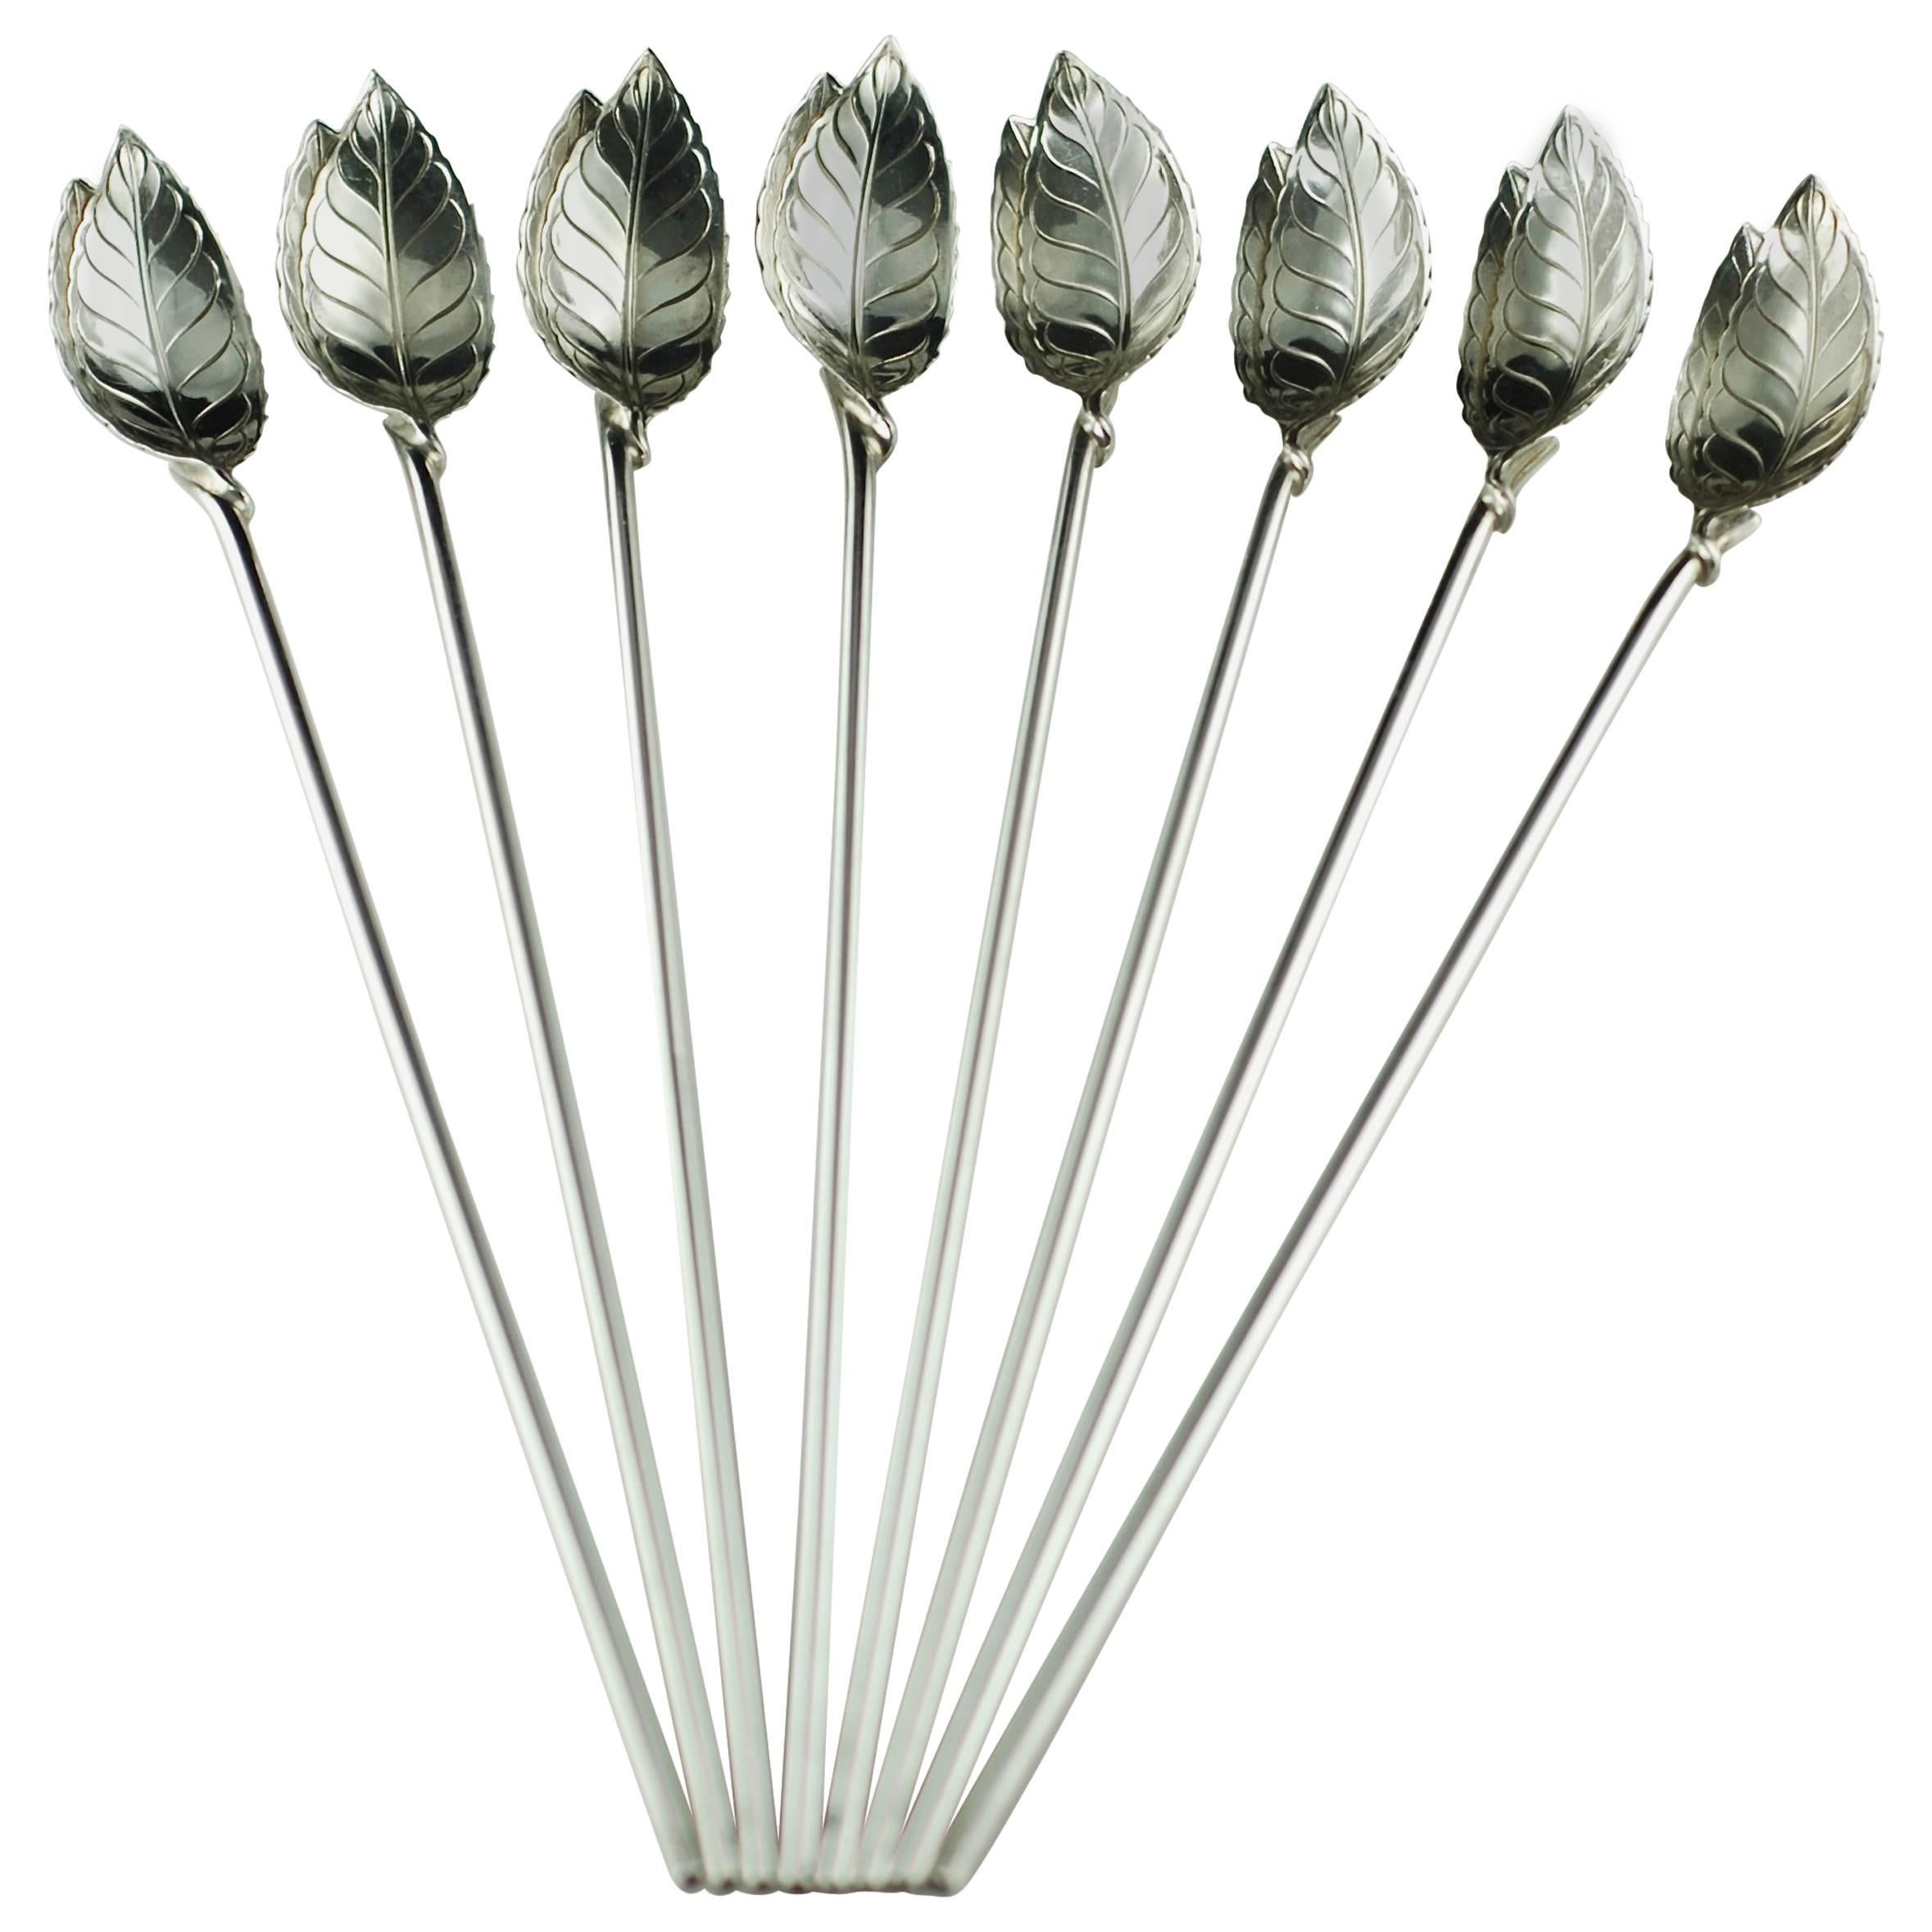 Tiffany & Co Sterling Mint Julep Spoons / Straws - Set of 8